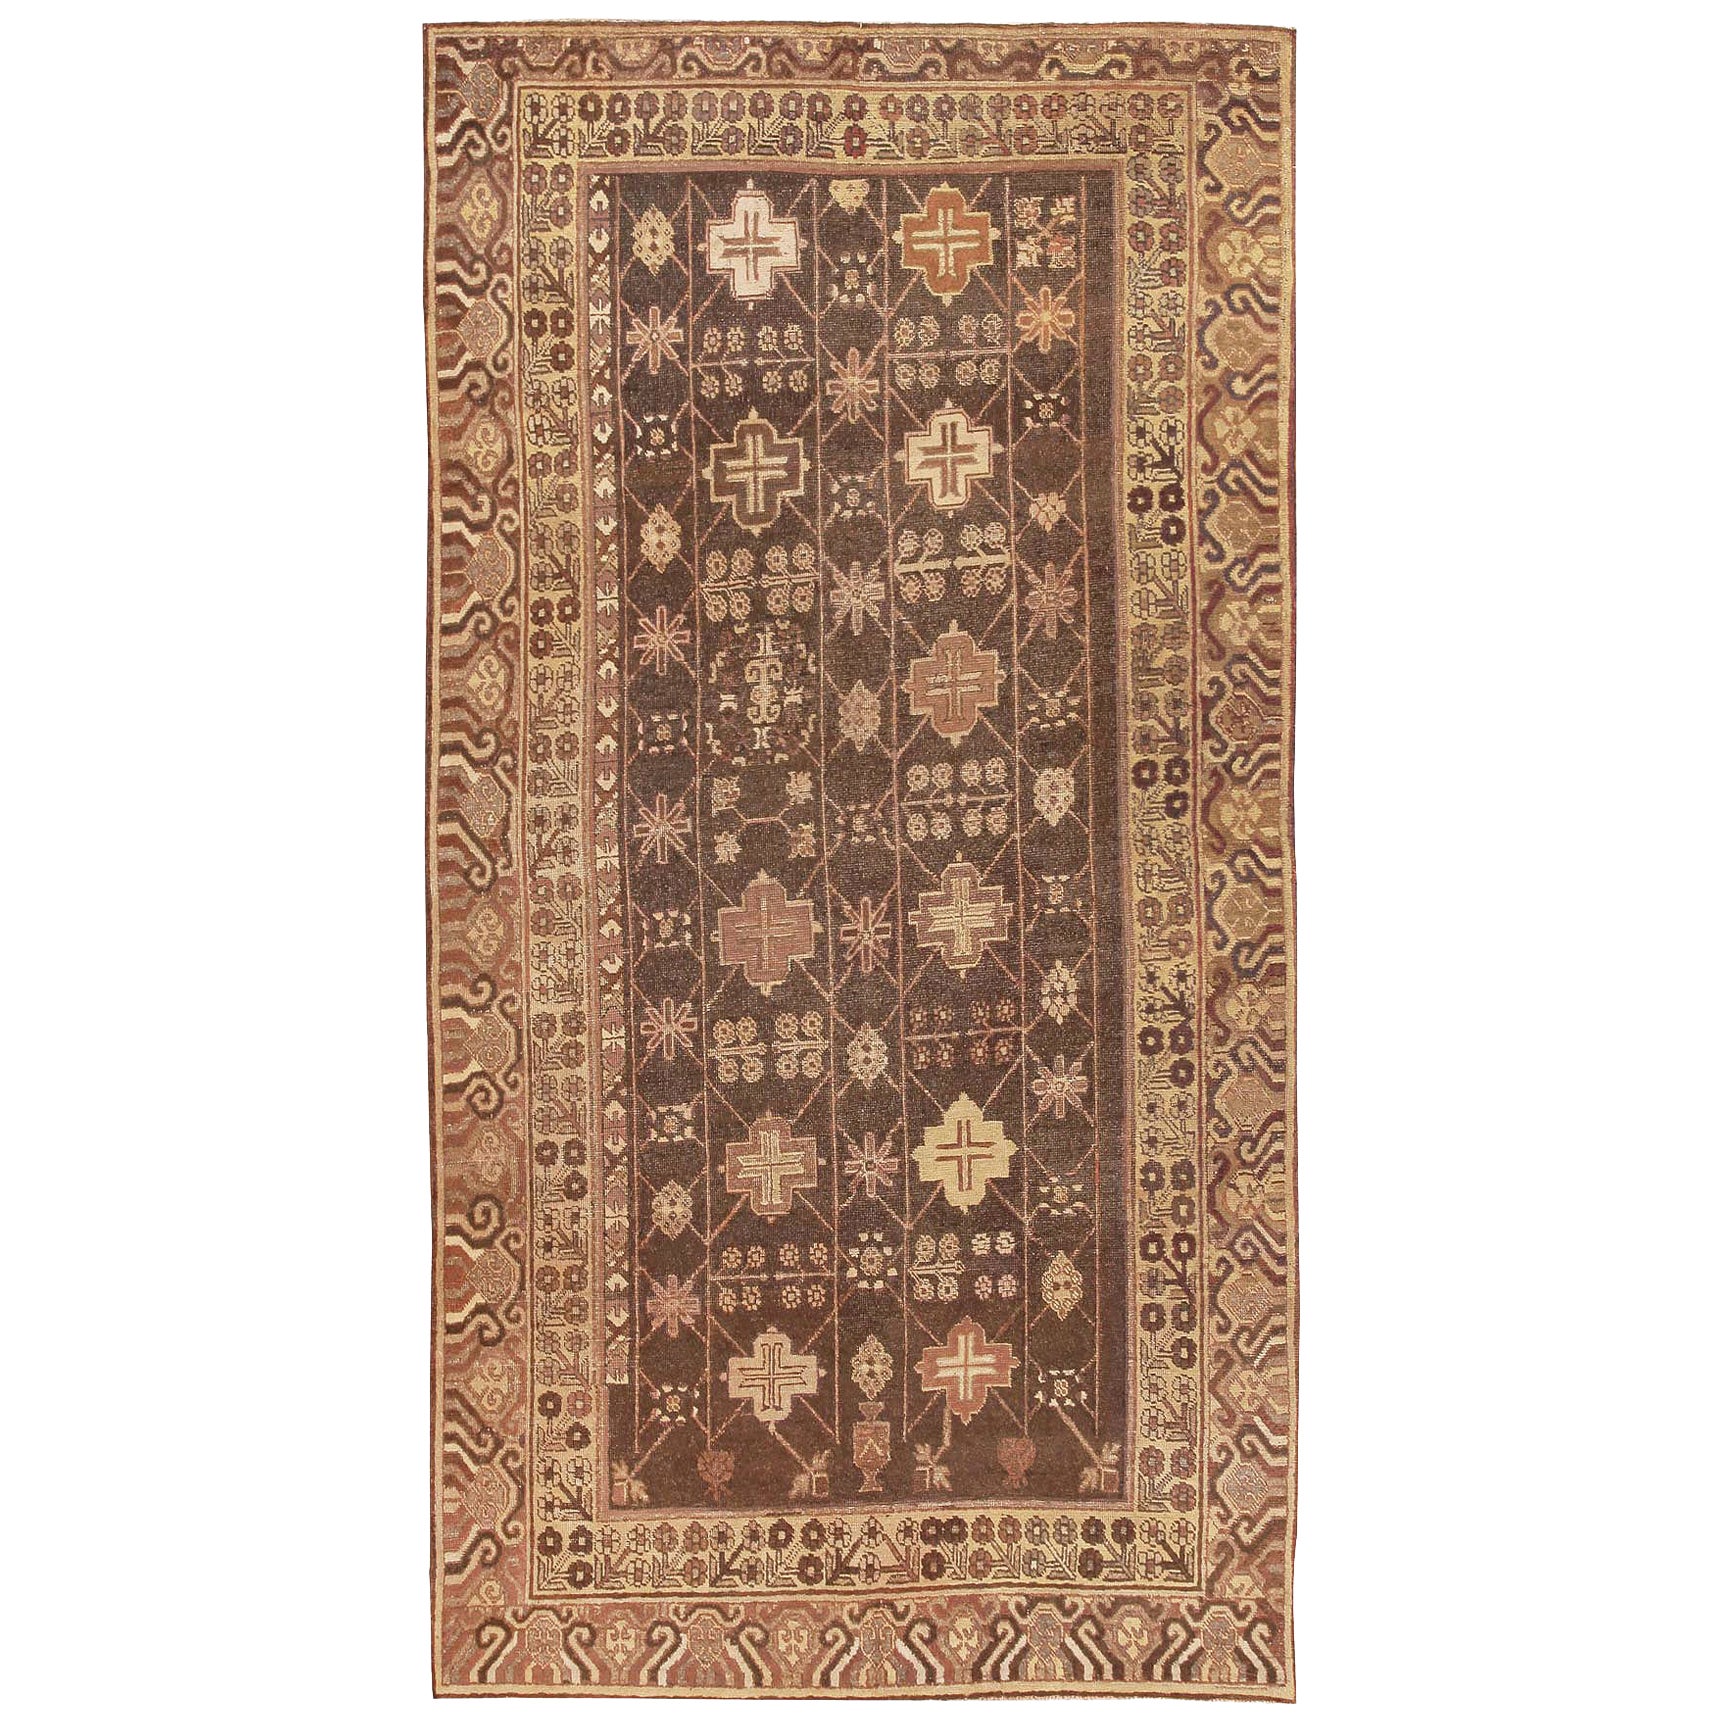 Nazmiyal Collection Antique Khotan Rug. Size: 5 ft 1 in x 10 ft 3 in 